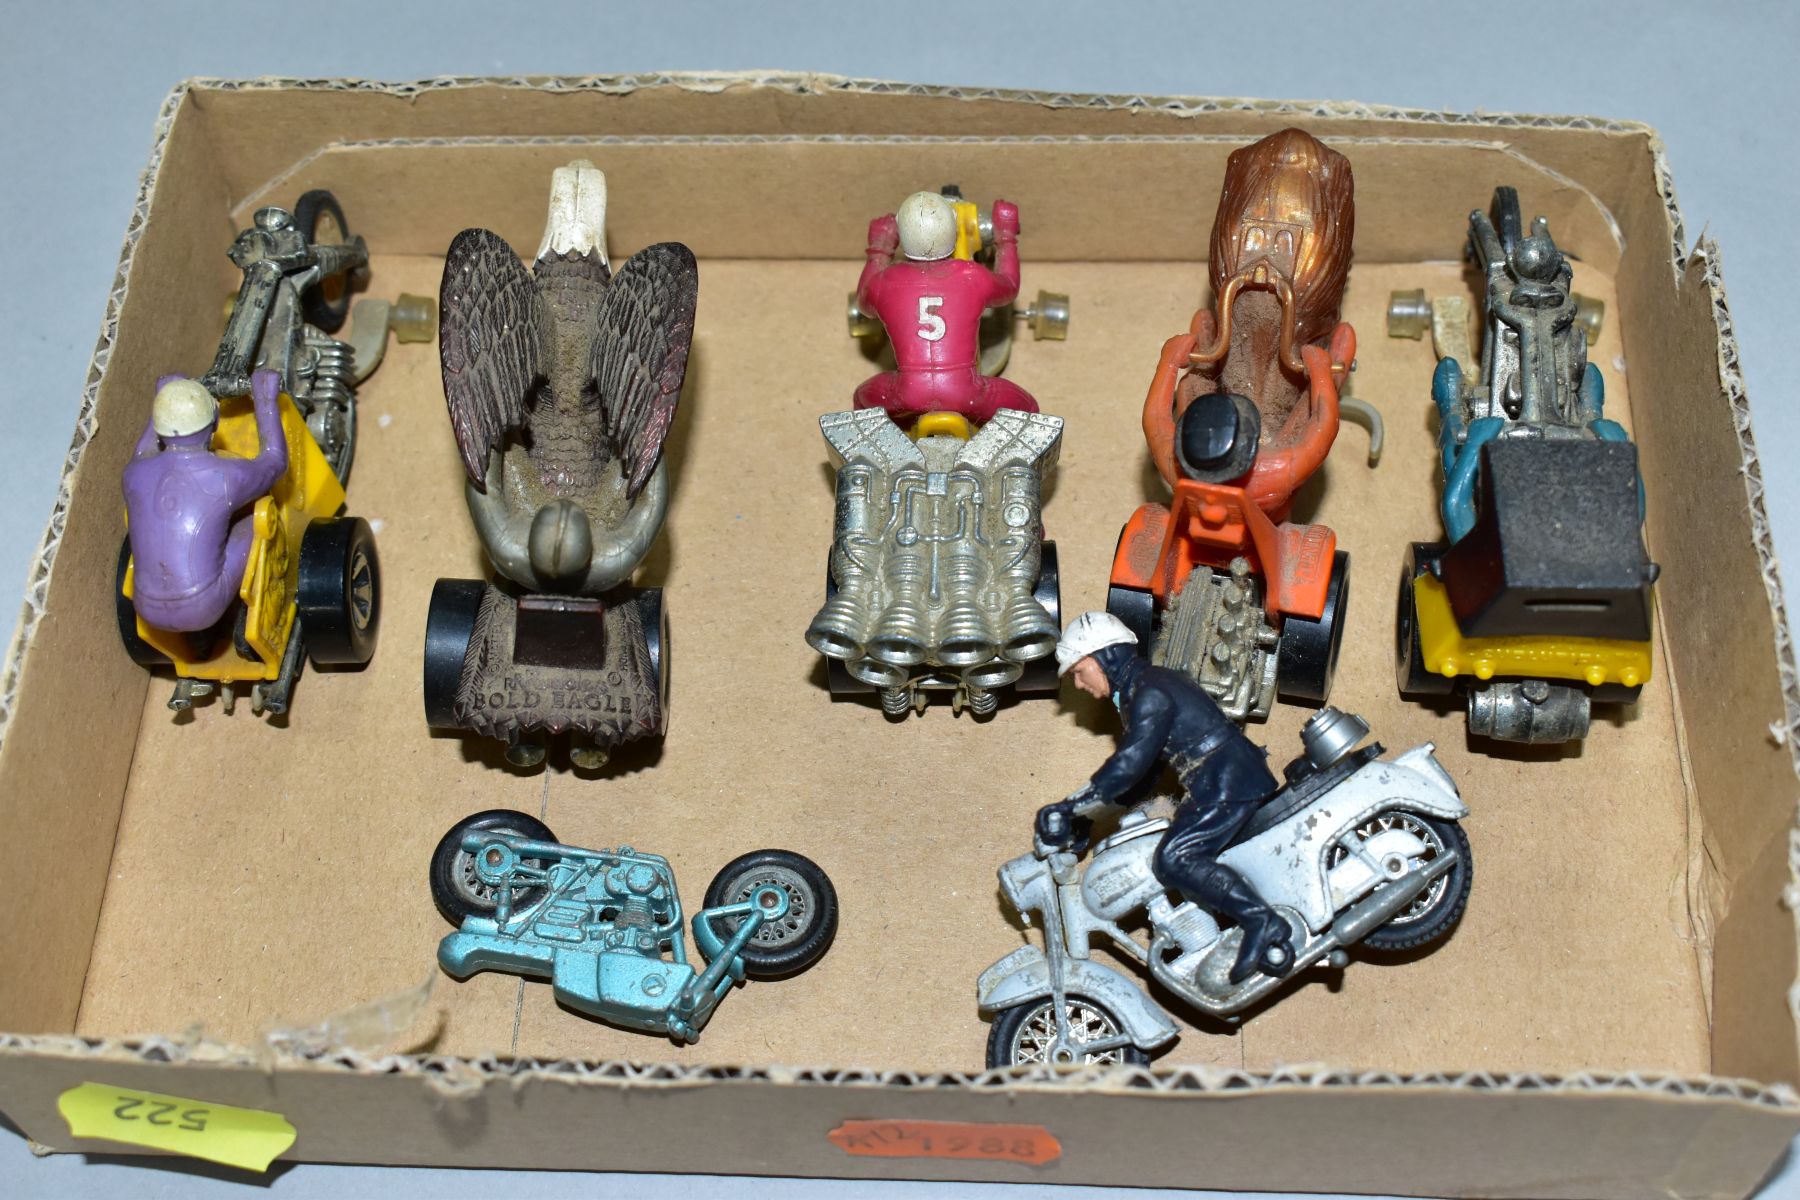 FIVE UNBOXED MATTEL HOT WHEELS RRRUMBLERS, MOTORBIKES, 'Bold Eagle', 'Centirion', 'Chopper Chariot', - Image 3 of 5